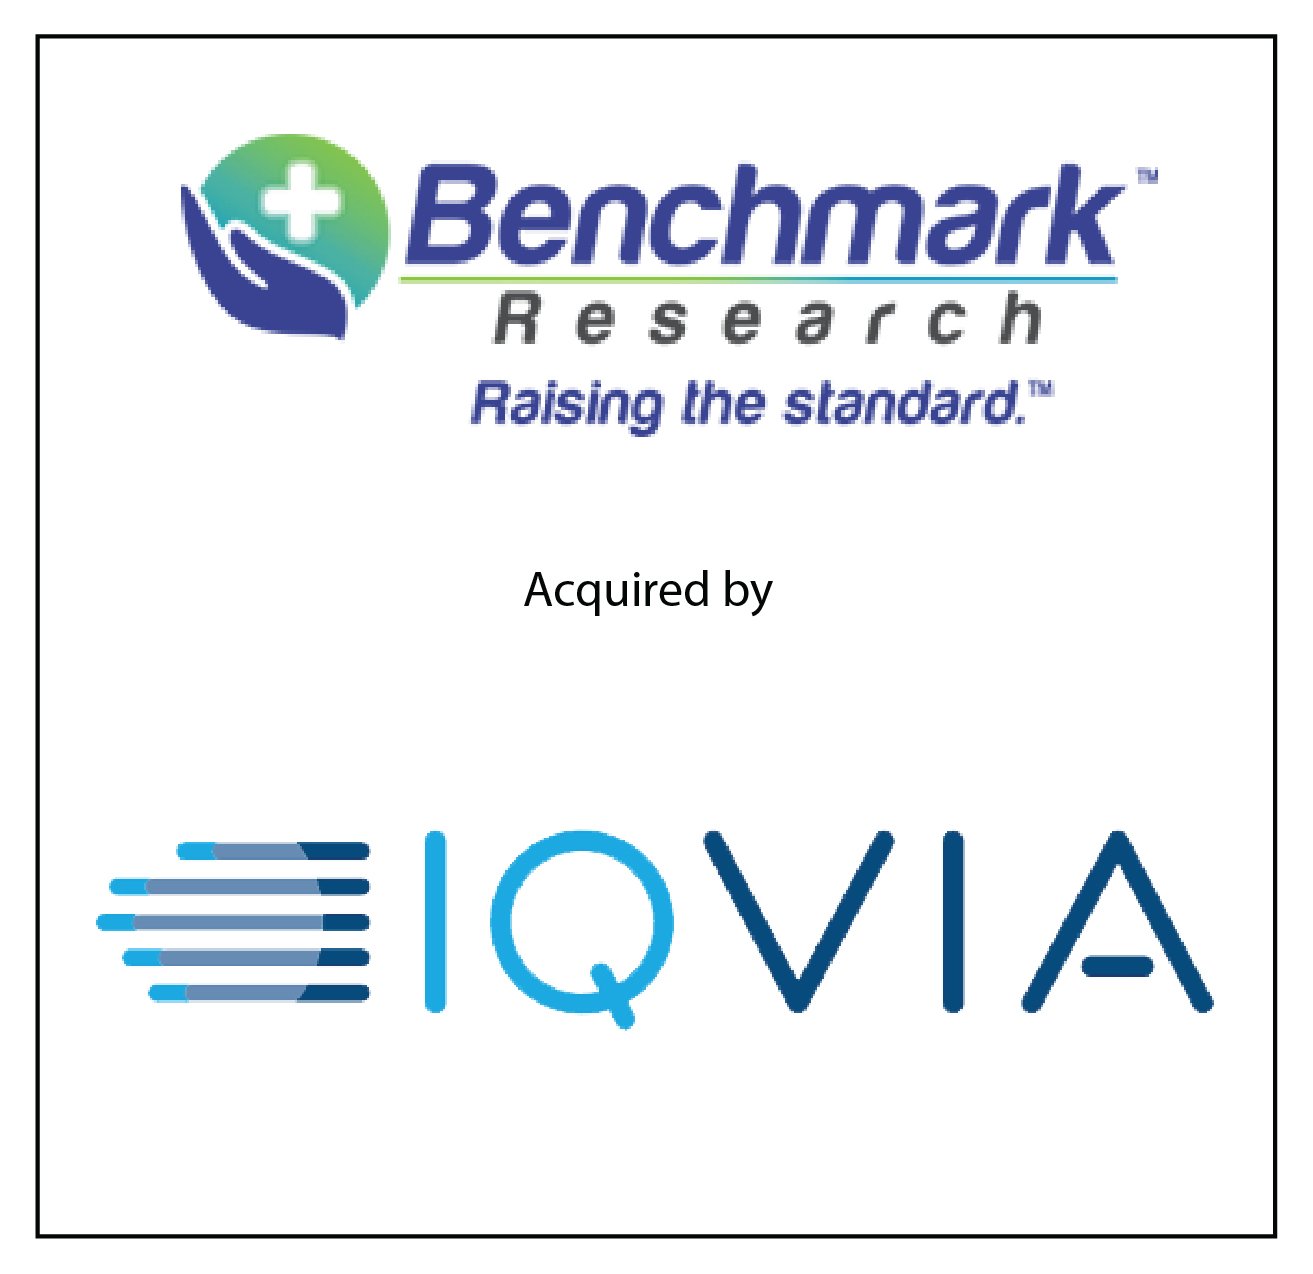 Benchmark Research Acquired by IQVIA, combined with Avacare to Expand Vaccine and Clinical Trial Site Capabilities